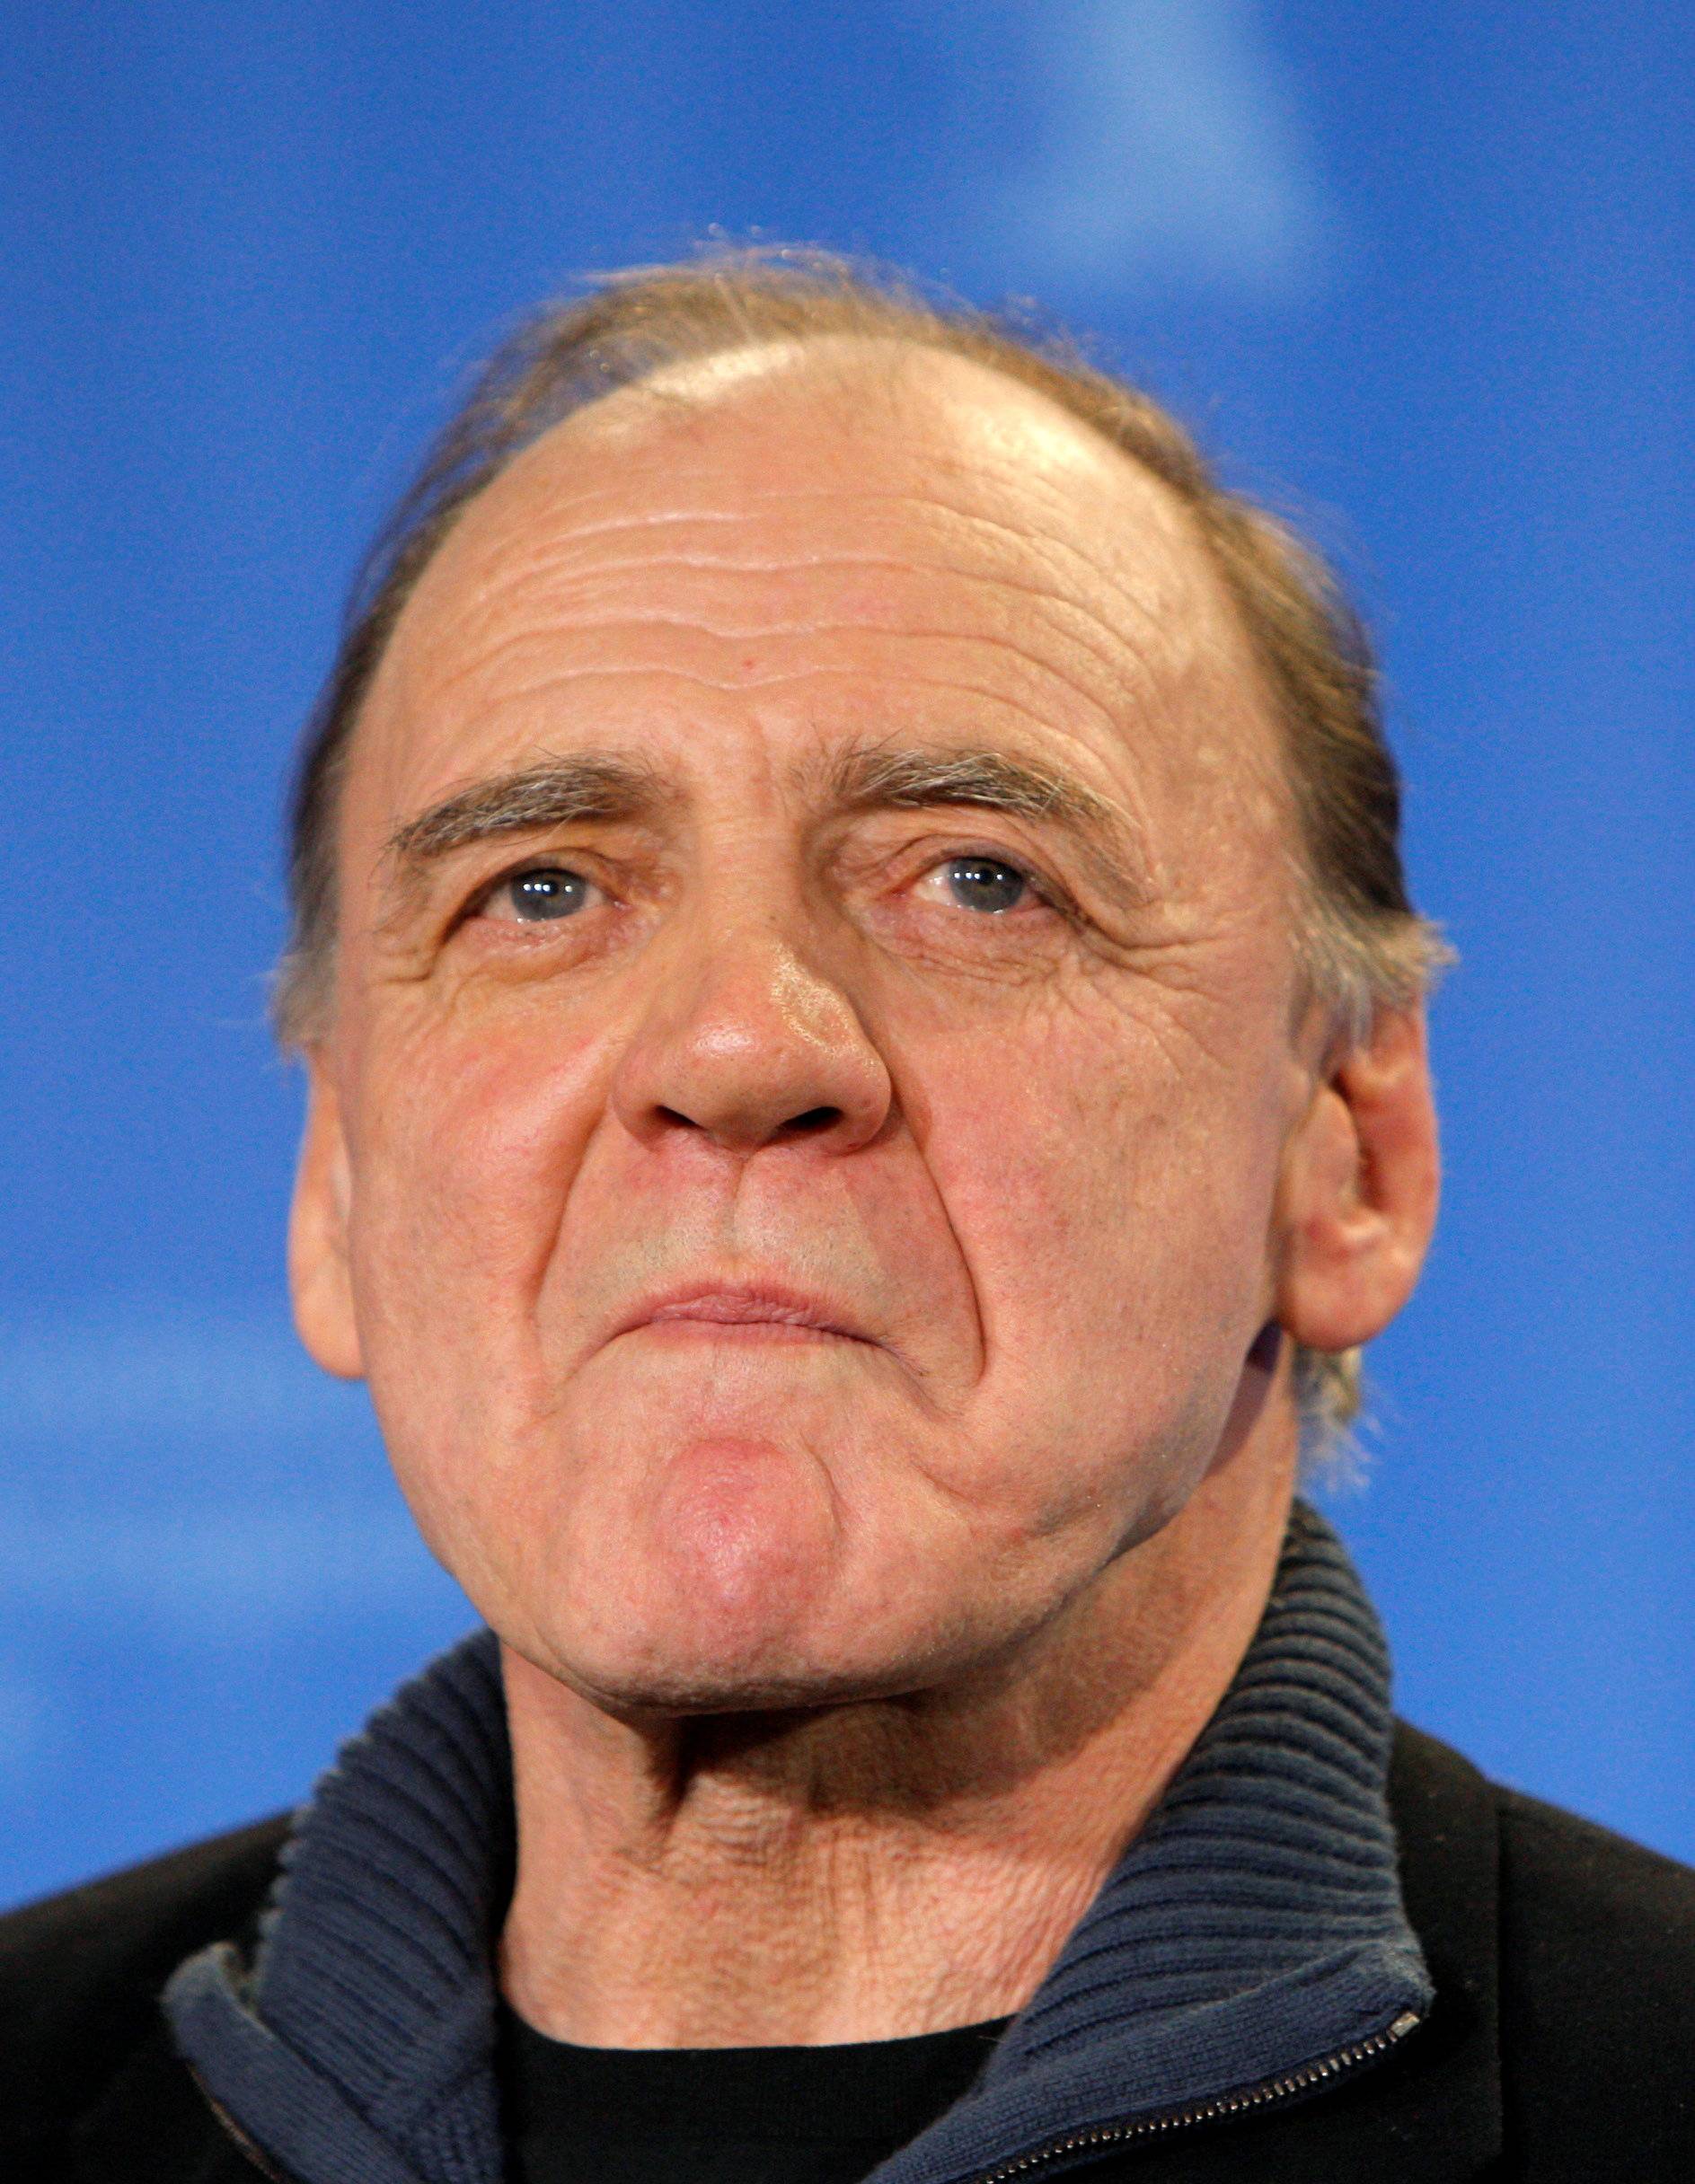 FILE PHOTO: Actor Bruno Ganz poses during photocall to present his film 'The Dust Of Time' at the 59th Berlinale film festival in Berlin